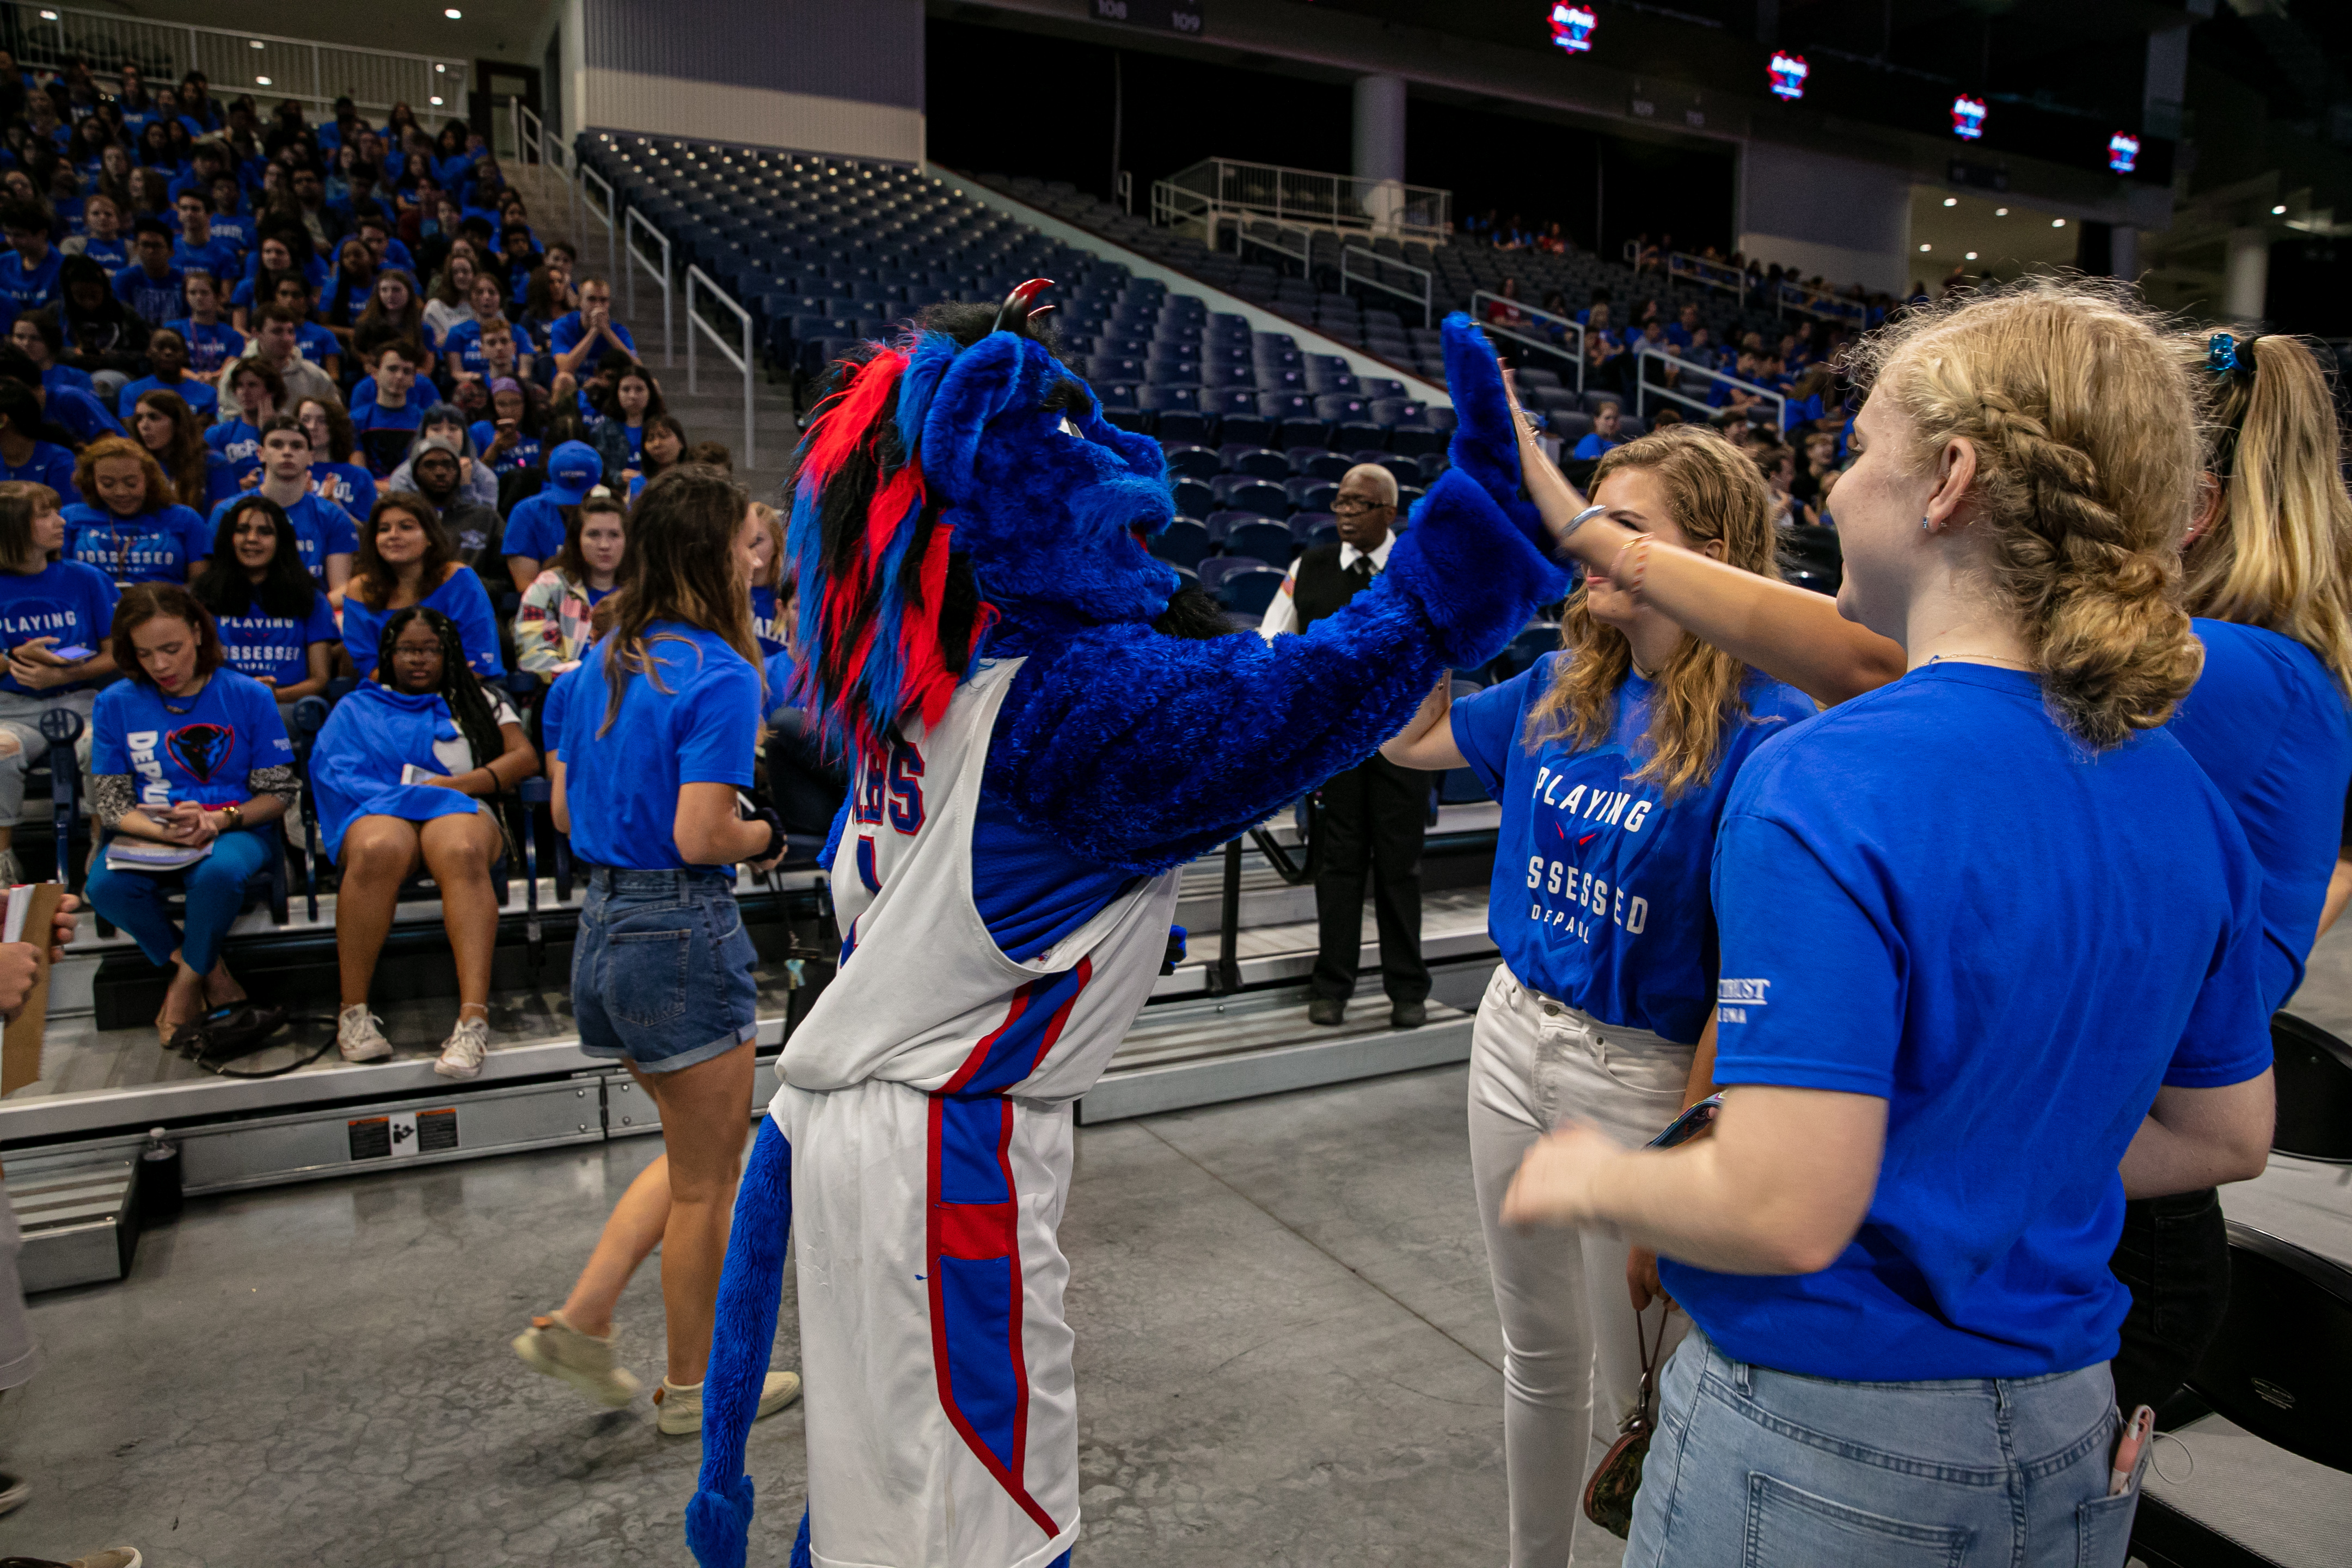 DIBS helps spark up school spirit at DePaul University’s first student convocation